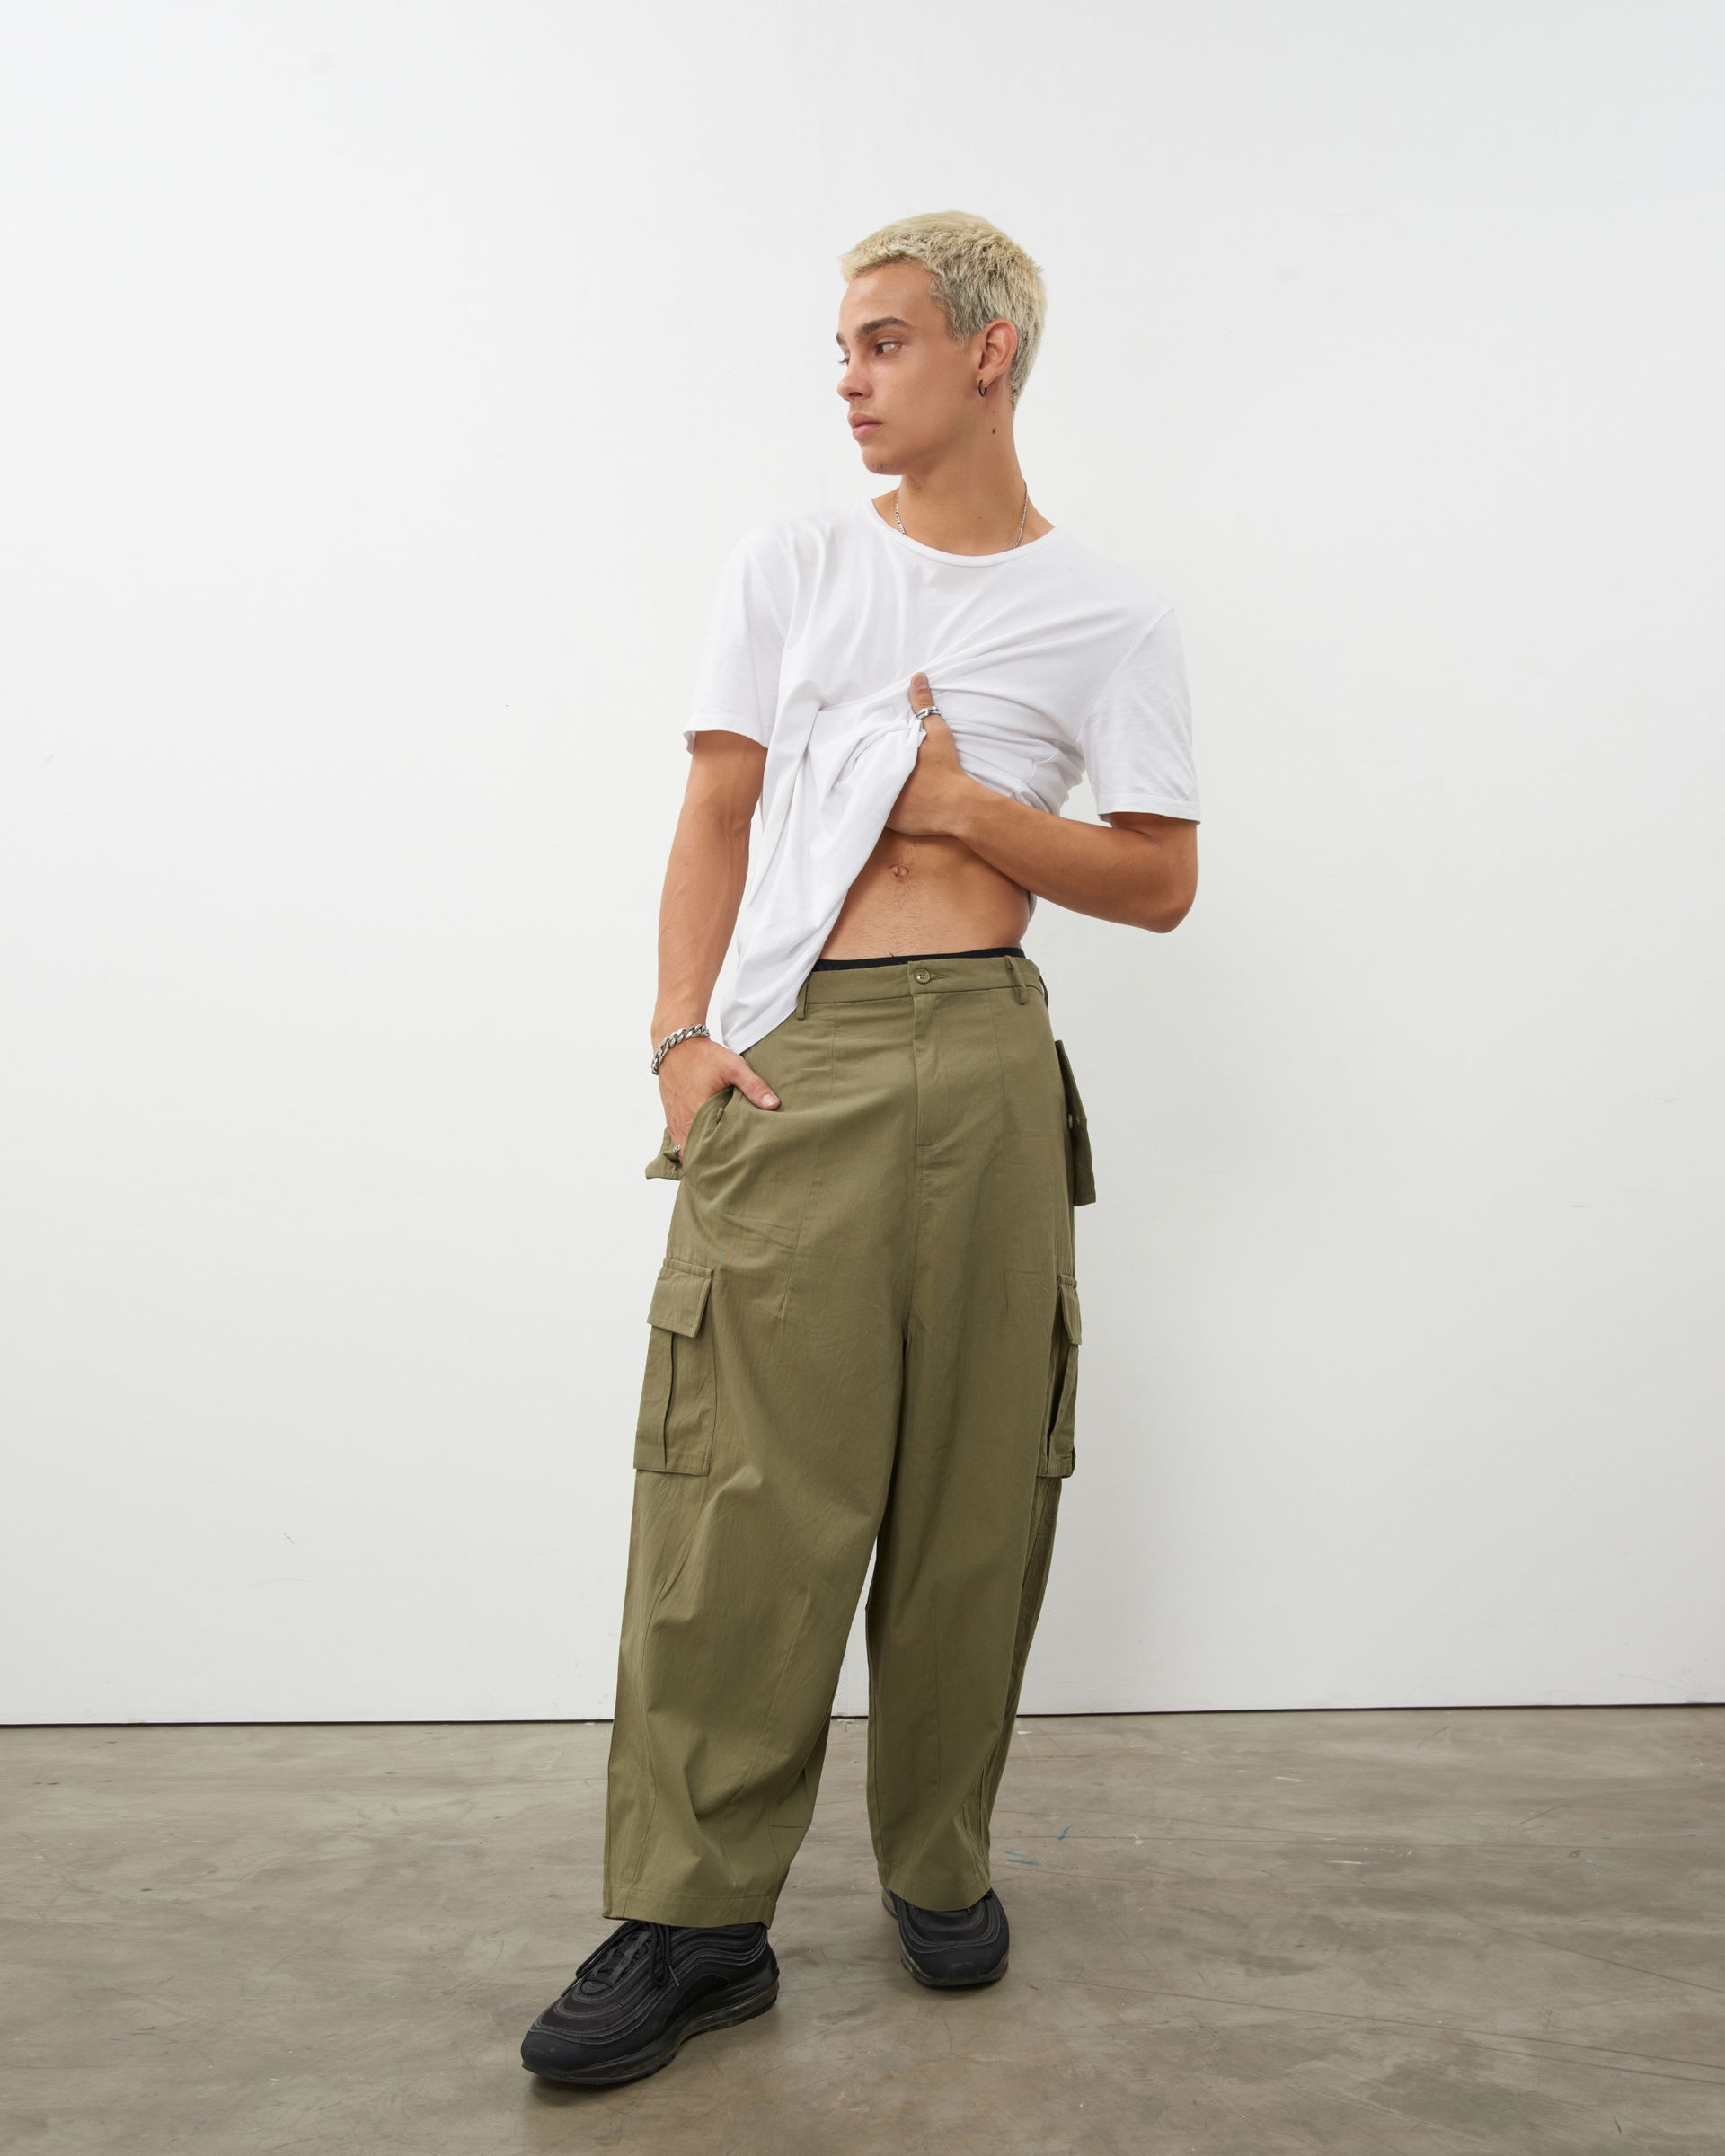 Balloon Pants in Olive